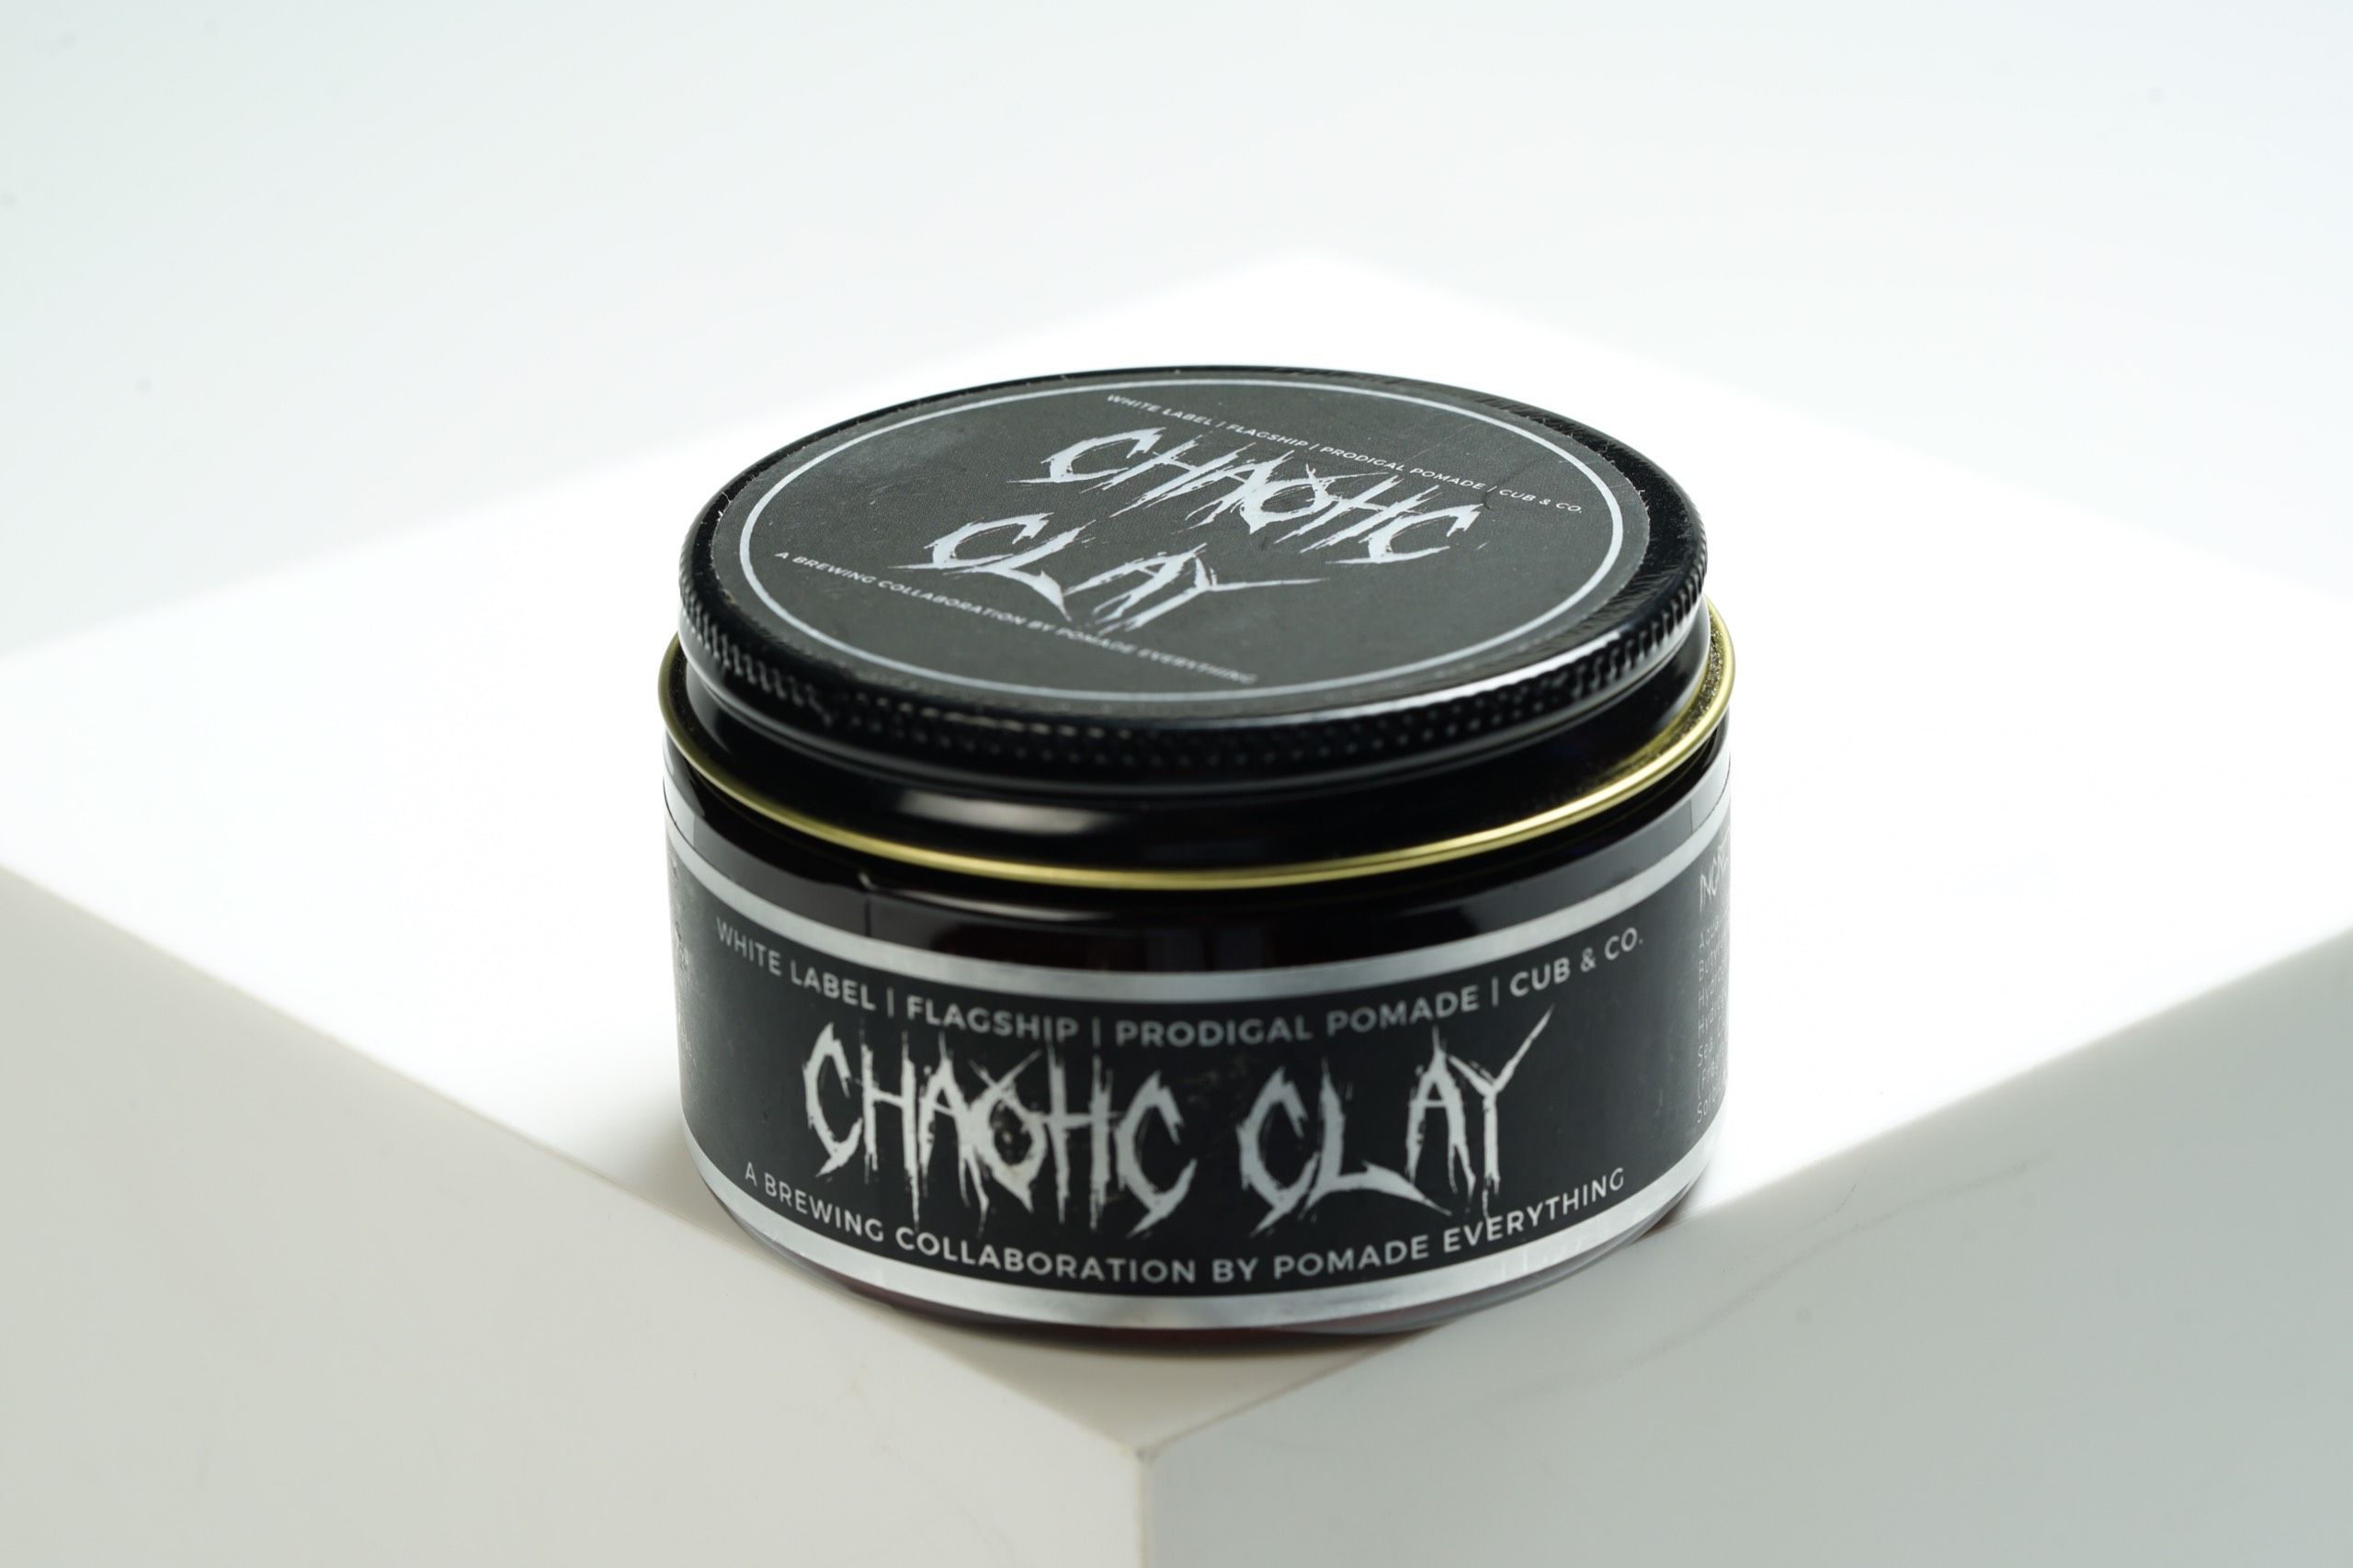 Chaotic Clay – Pomade Everything Collaboration